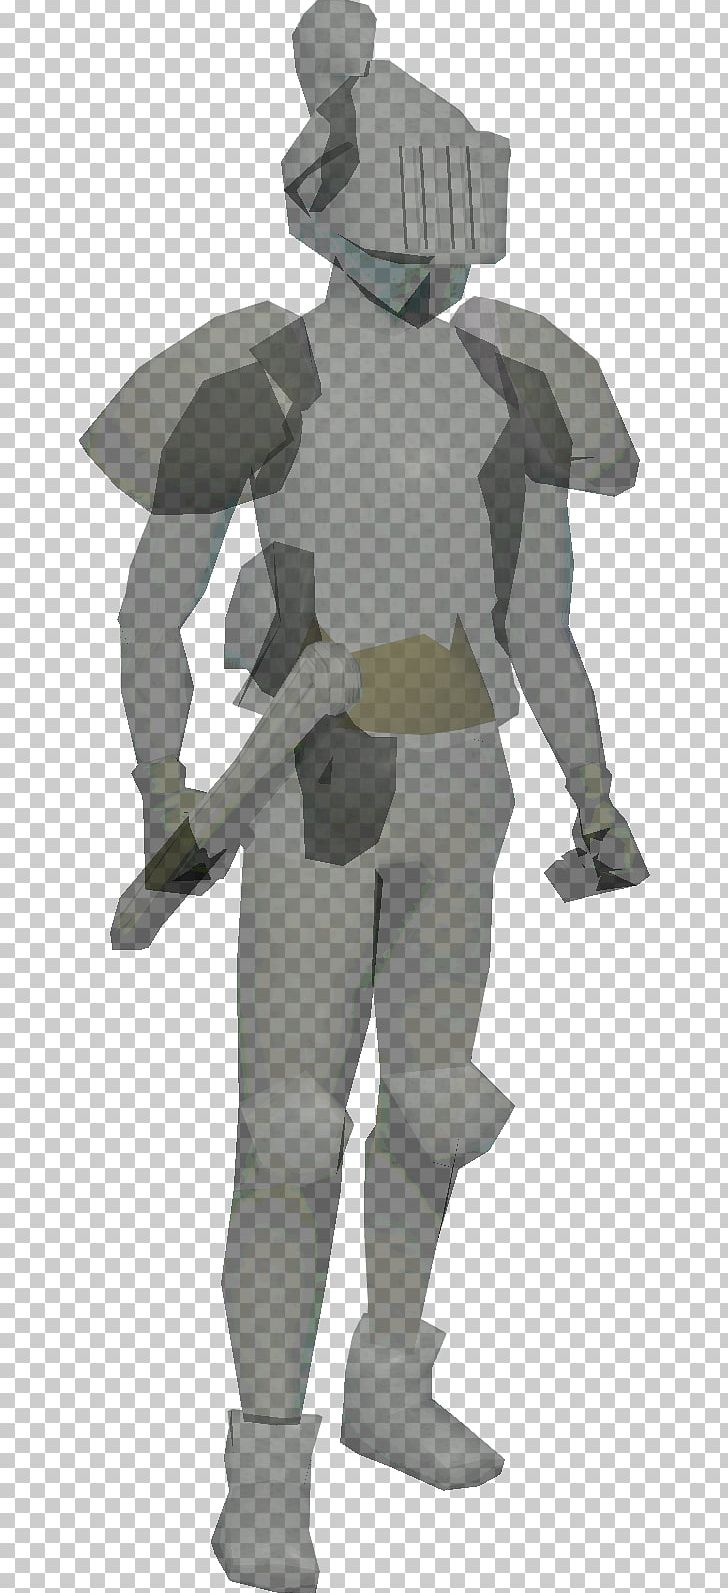 Old School RuneScape Warrior Wikia PNG, Clipart, Armour, Copyright, Death, Fantasy, Game Free PNG Download